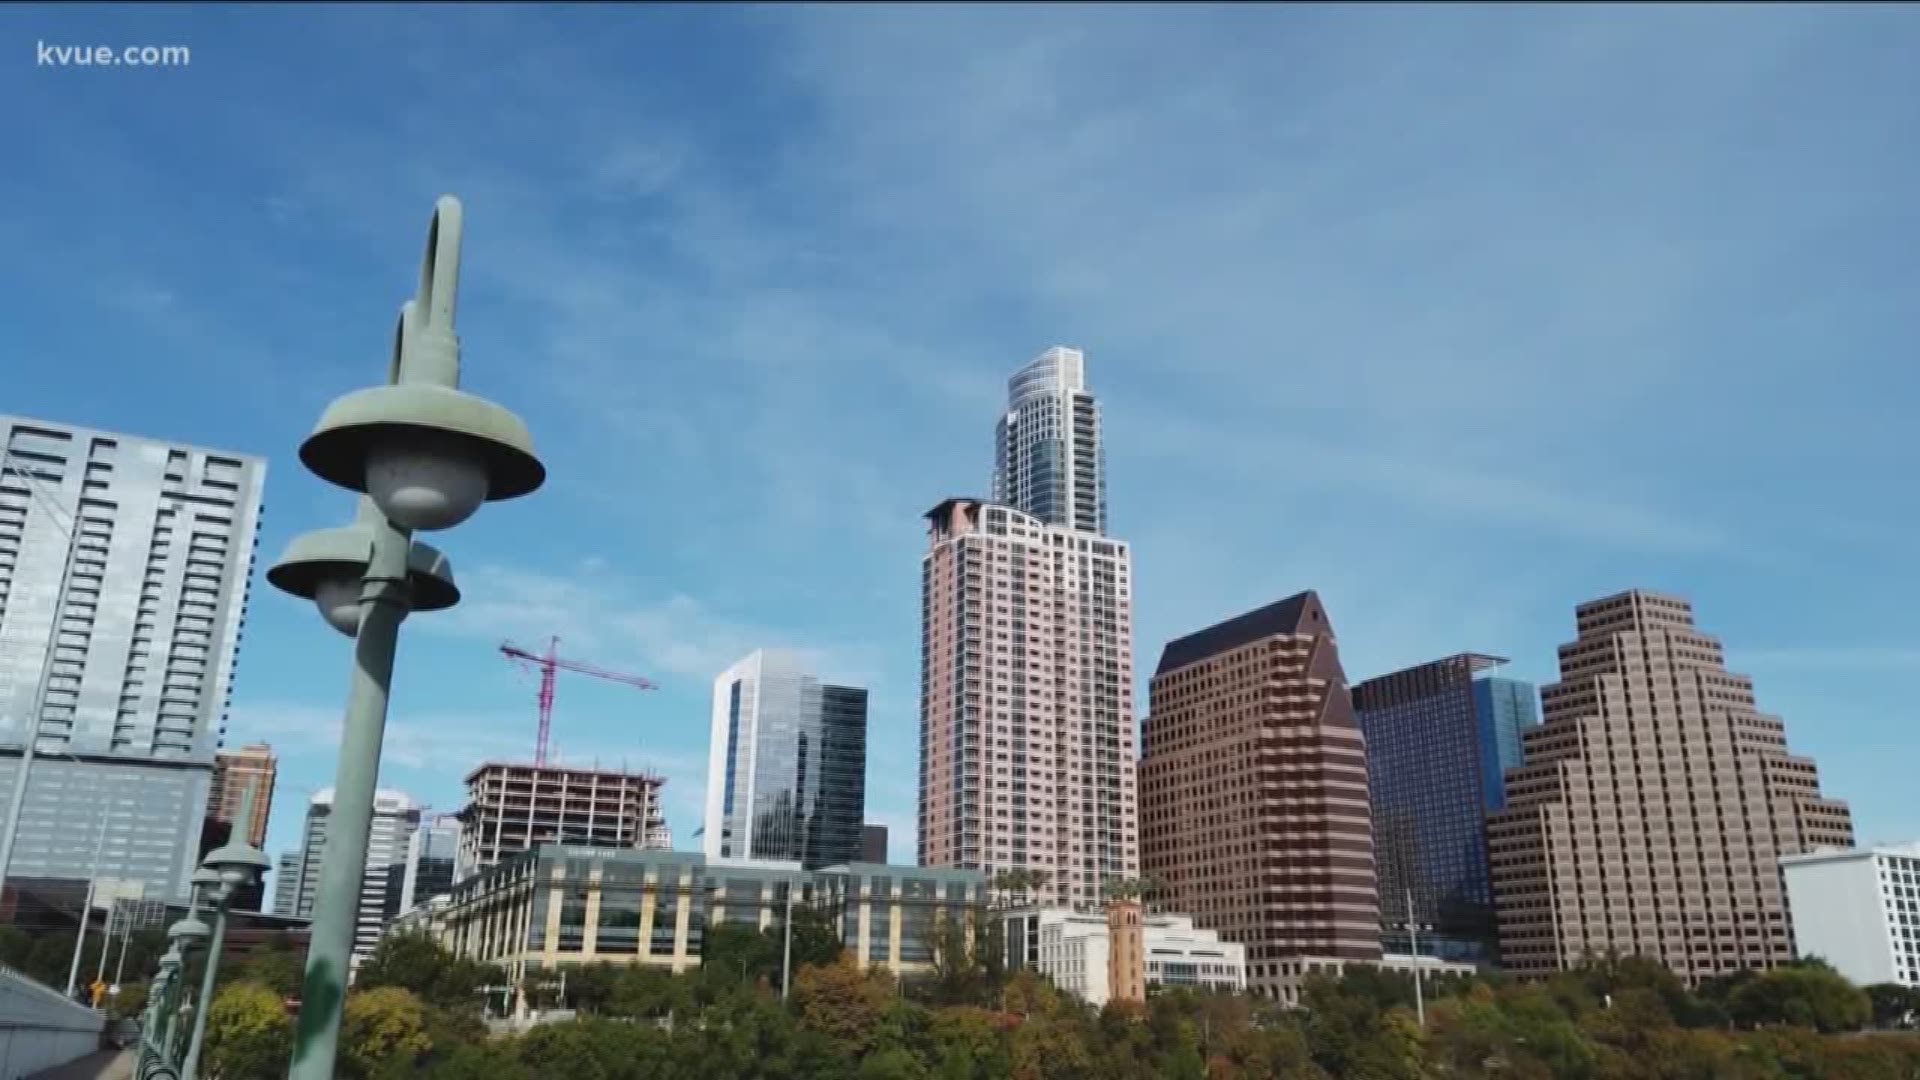 By 2040, nearly 4 million people are expected to call the Austin metro area home. So, what will the people of tomorrow's Austin look like? Ashley Goudeau shows us.